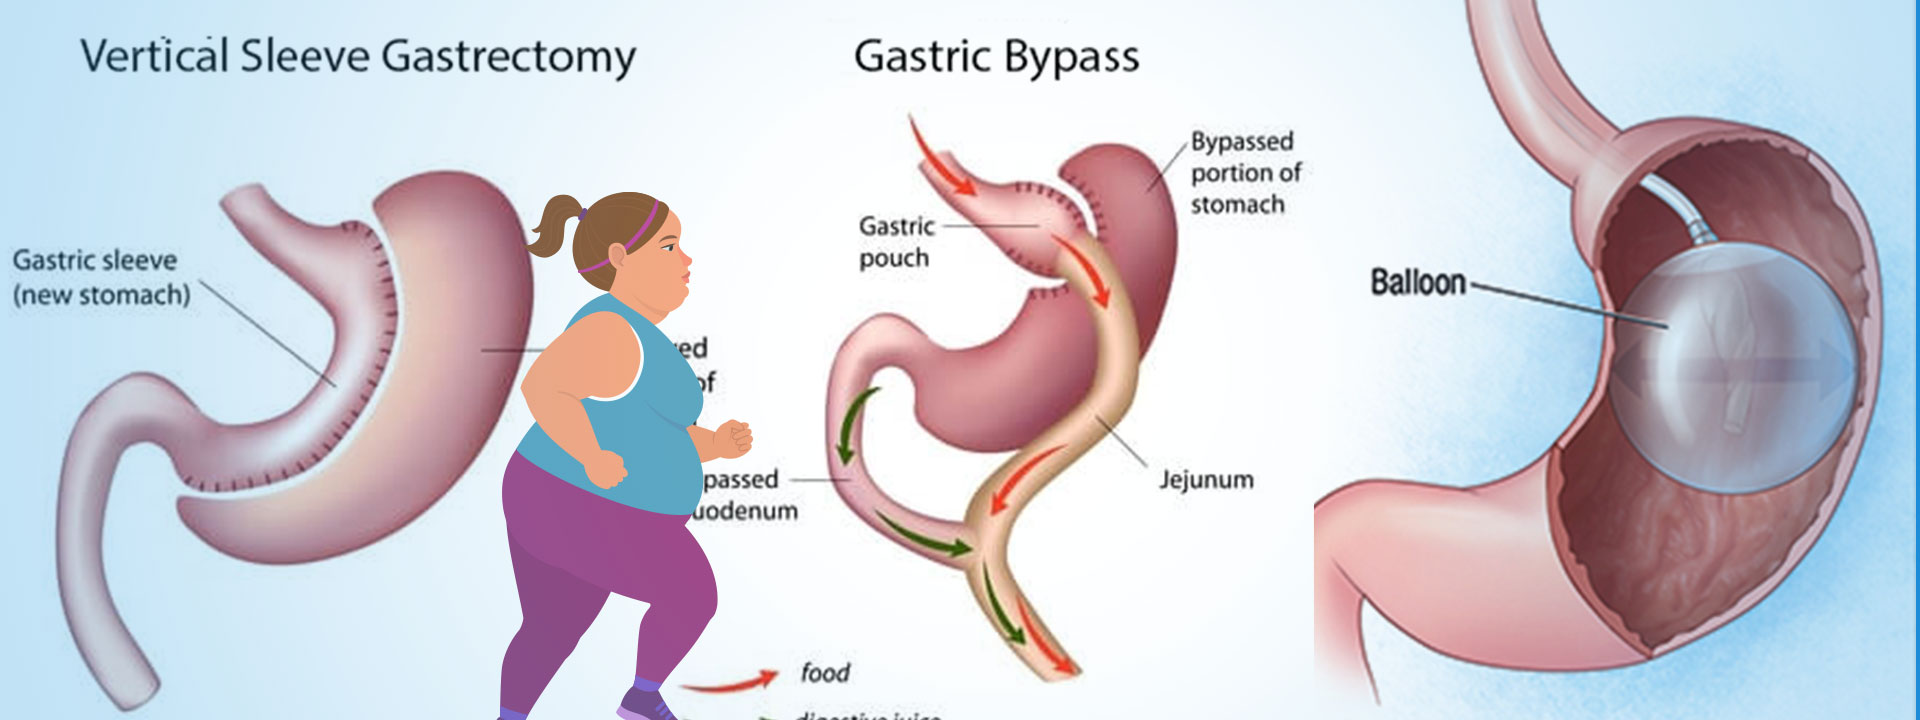 Different types of weight loss surgeries at Bariatric surgeon India, One of the best center for weight decrease surgery in Hyderabad